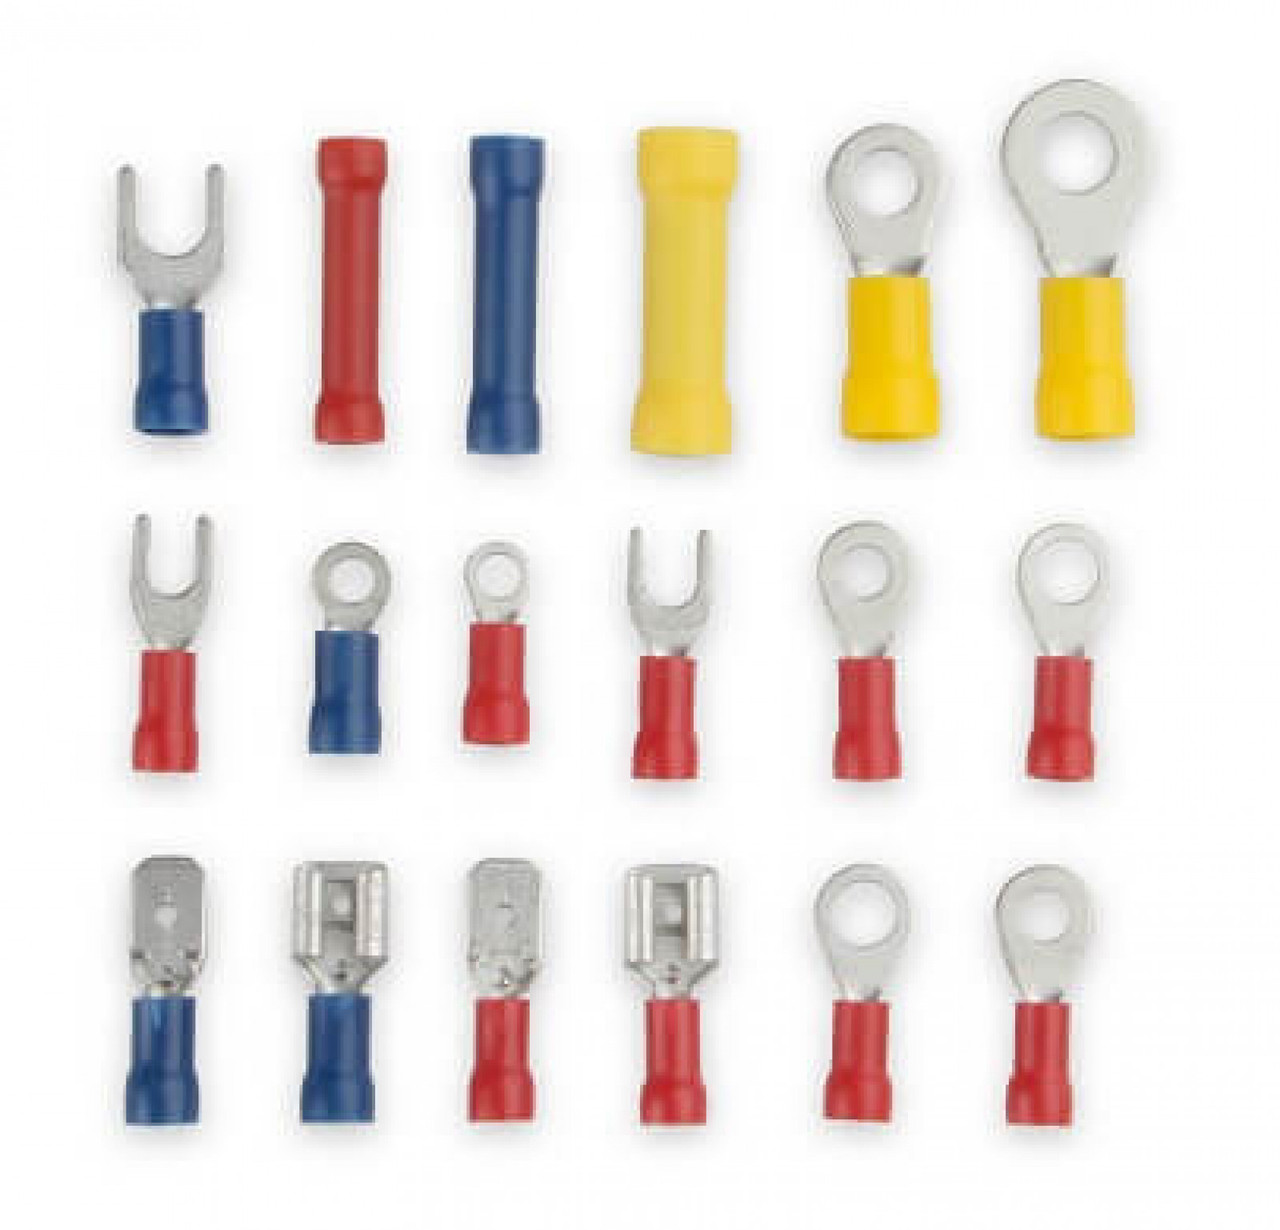 MSD Insulated Terminal Connector Kit (MSD-28195)